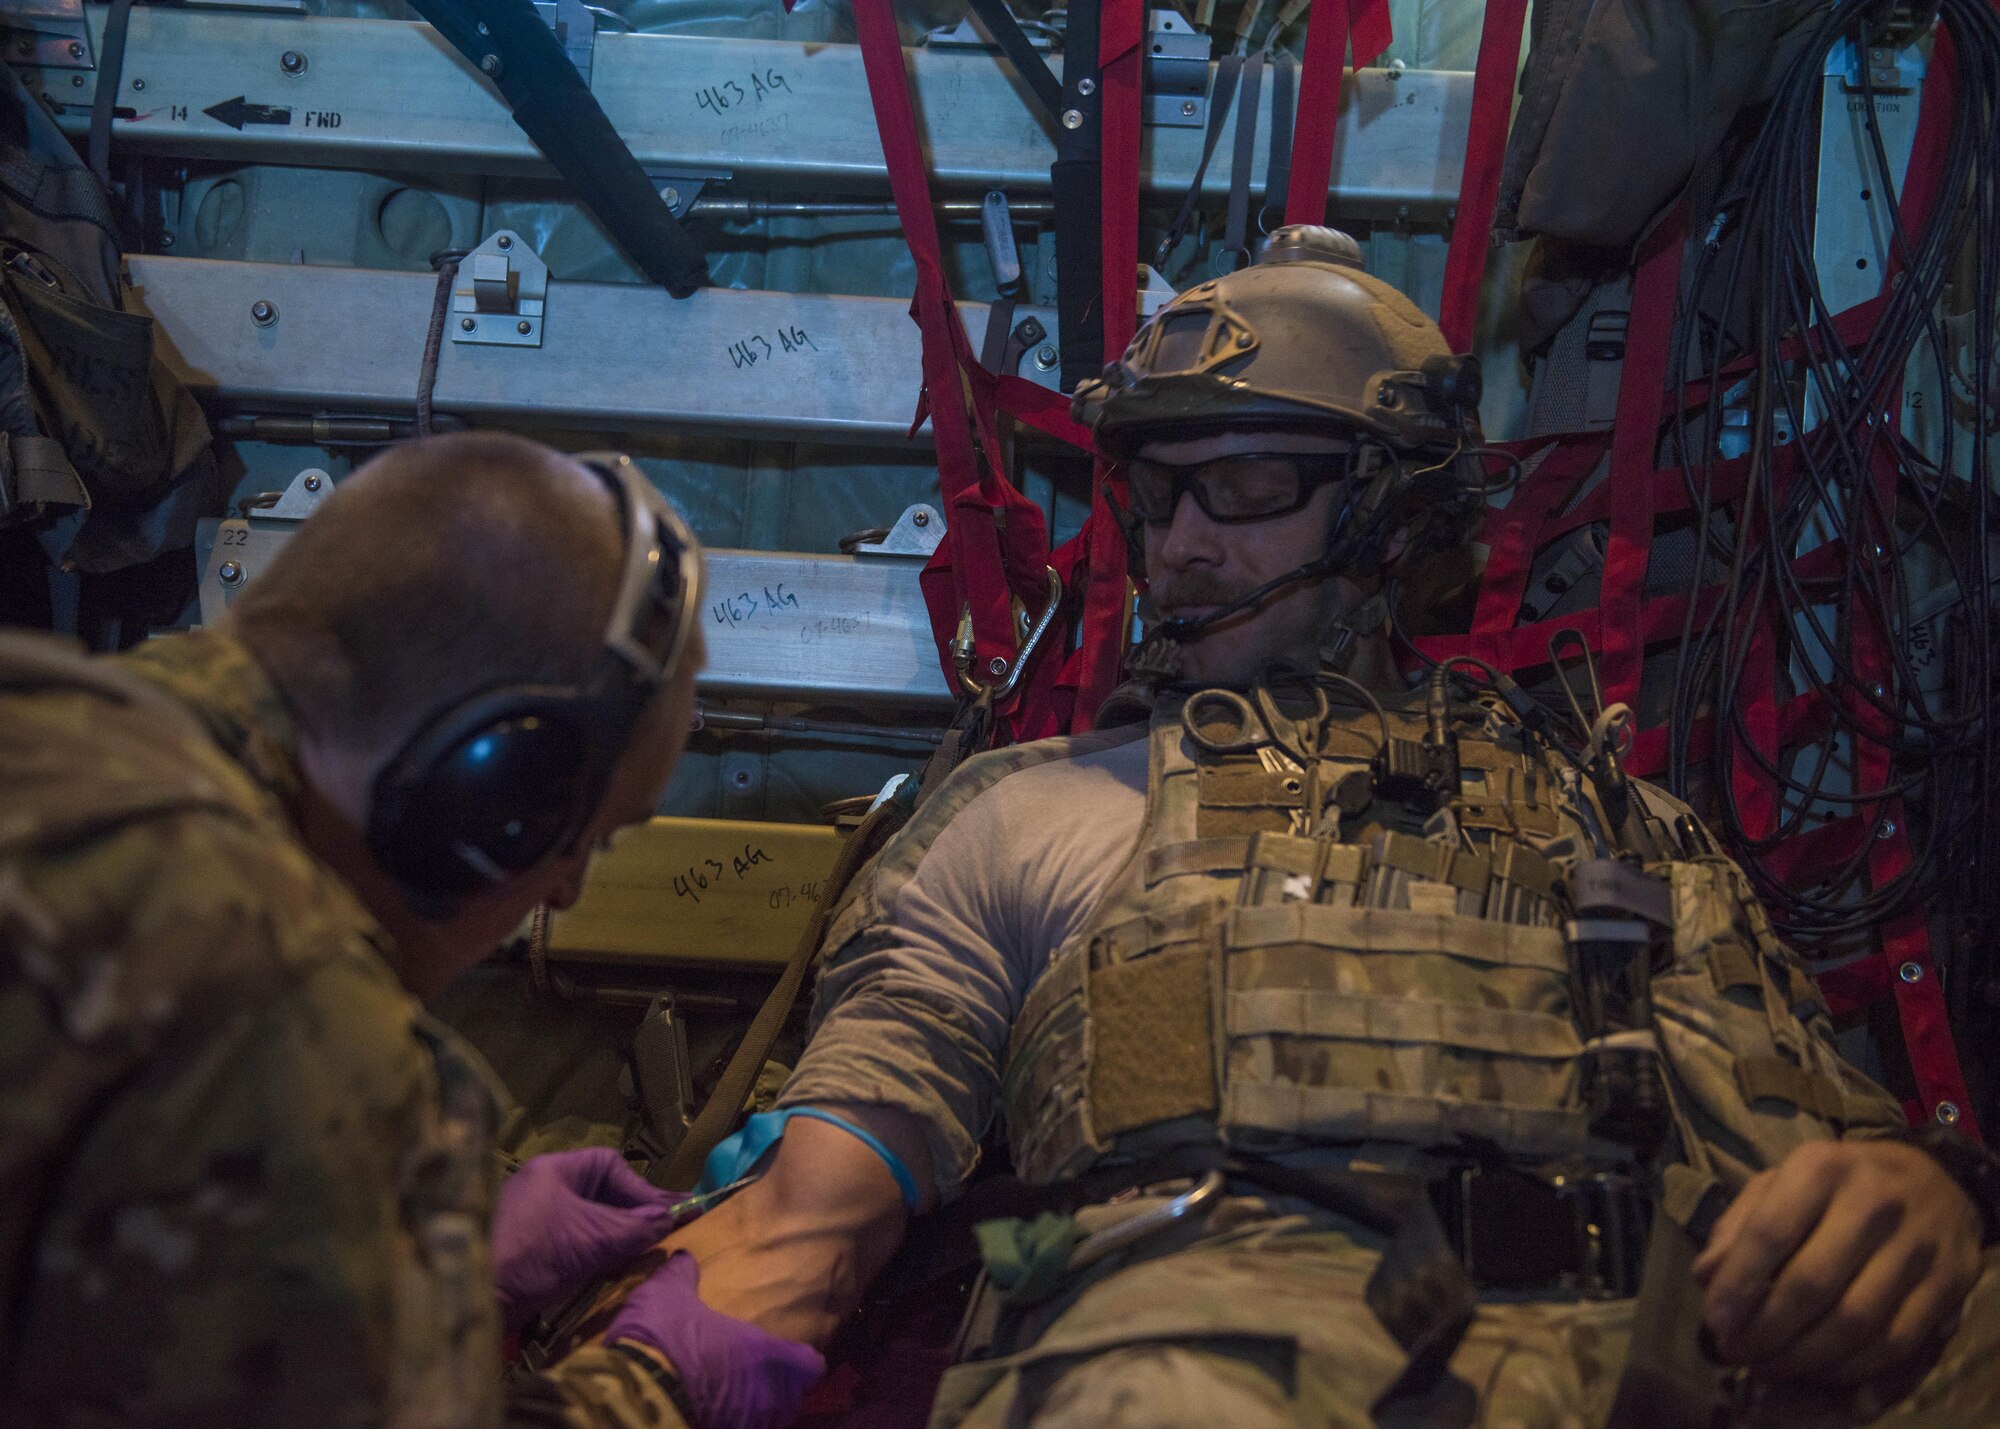 Staff Sgt. Roderick Campbell, 83rd Expeditionary Rescue Squadron, has an intravenous needle placed into his arm, Bagram Airfield, Afghanistan, Sept. 03, 2016. Airmen from the 83rd ERQS, paired with airmen from the 455th Expeditionary Aeromedical Evacuation Squadron to increase interoperability with each other and demonstrate theater personnel recovery capabilities. (U.S. Air Force photo by Senior Airman Justyn M. Freeman)